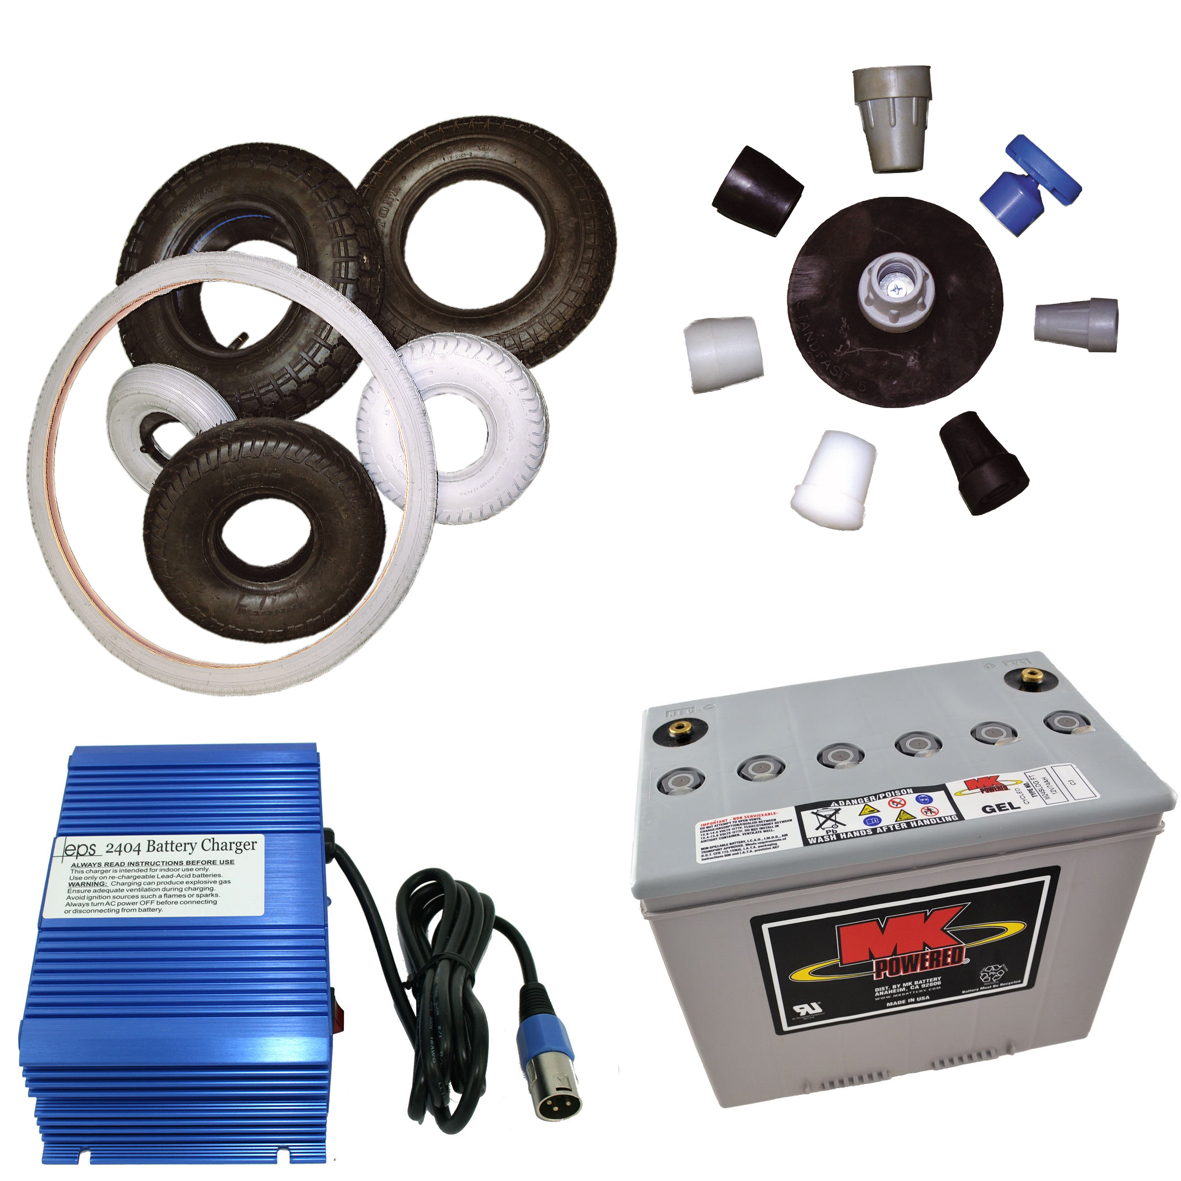 A variety of spare parts including battery, charger and types